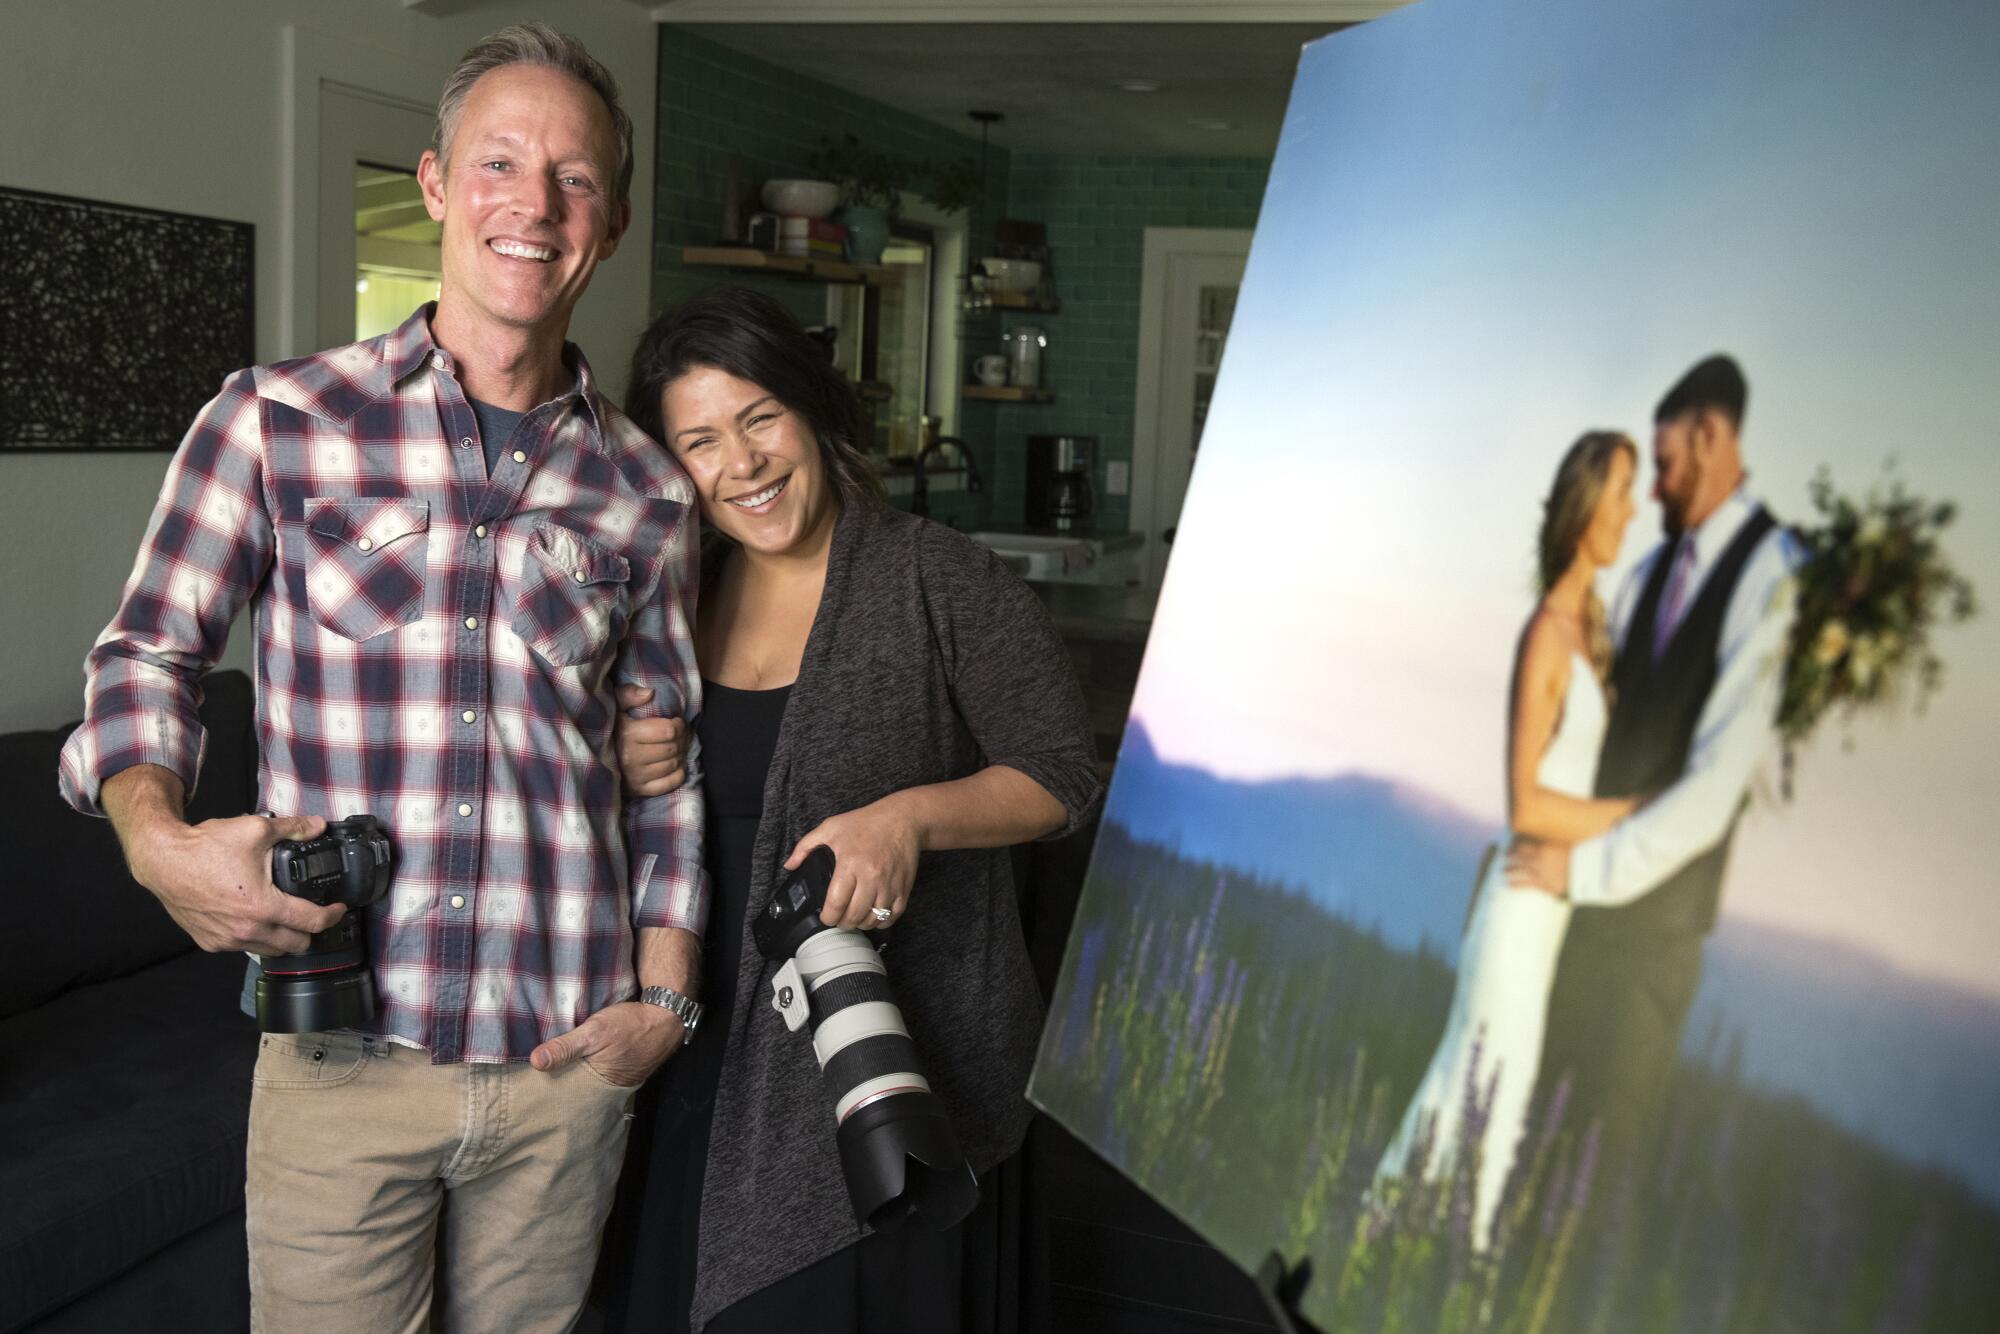 Wedding photographers Andrew Mishler and his wife Melanie, at their home in Penn Valley